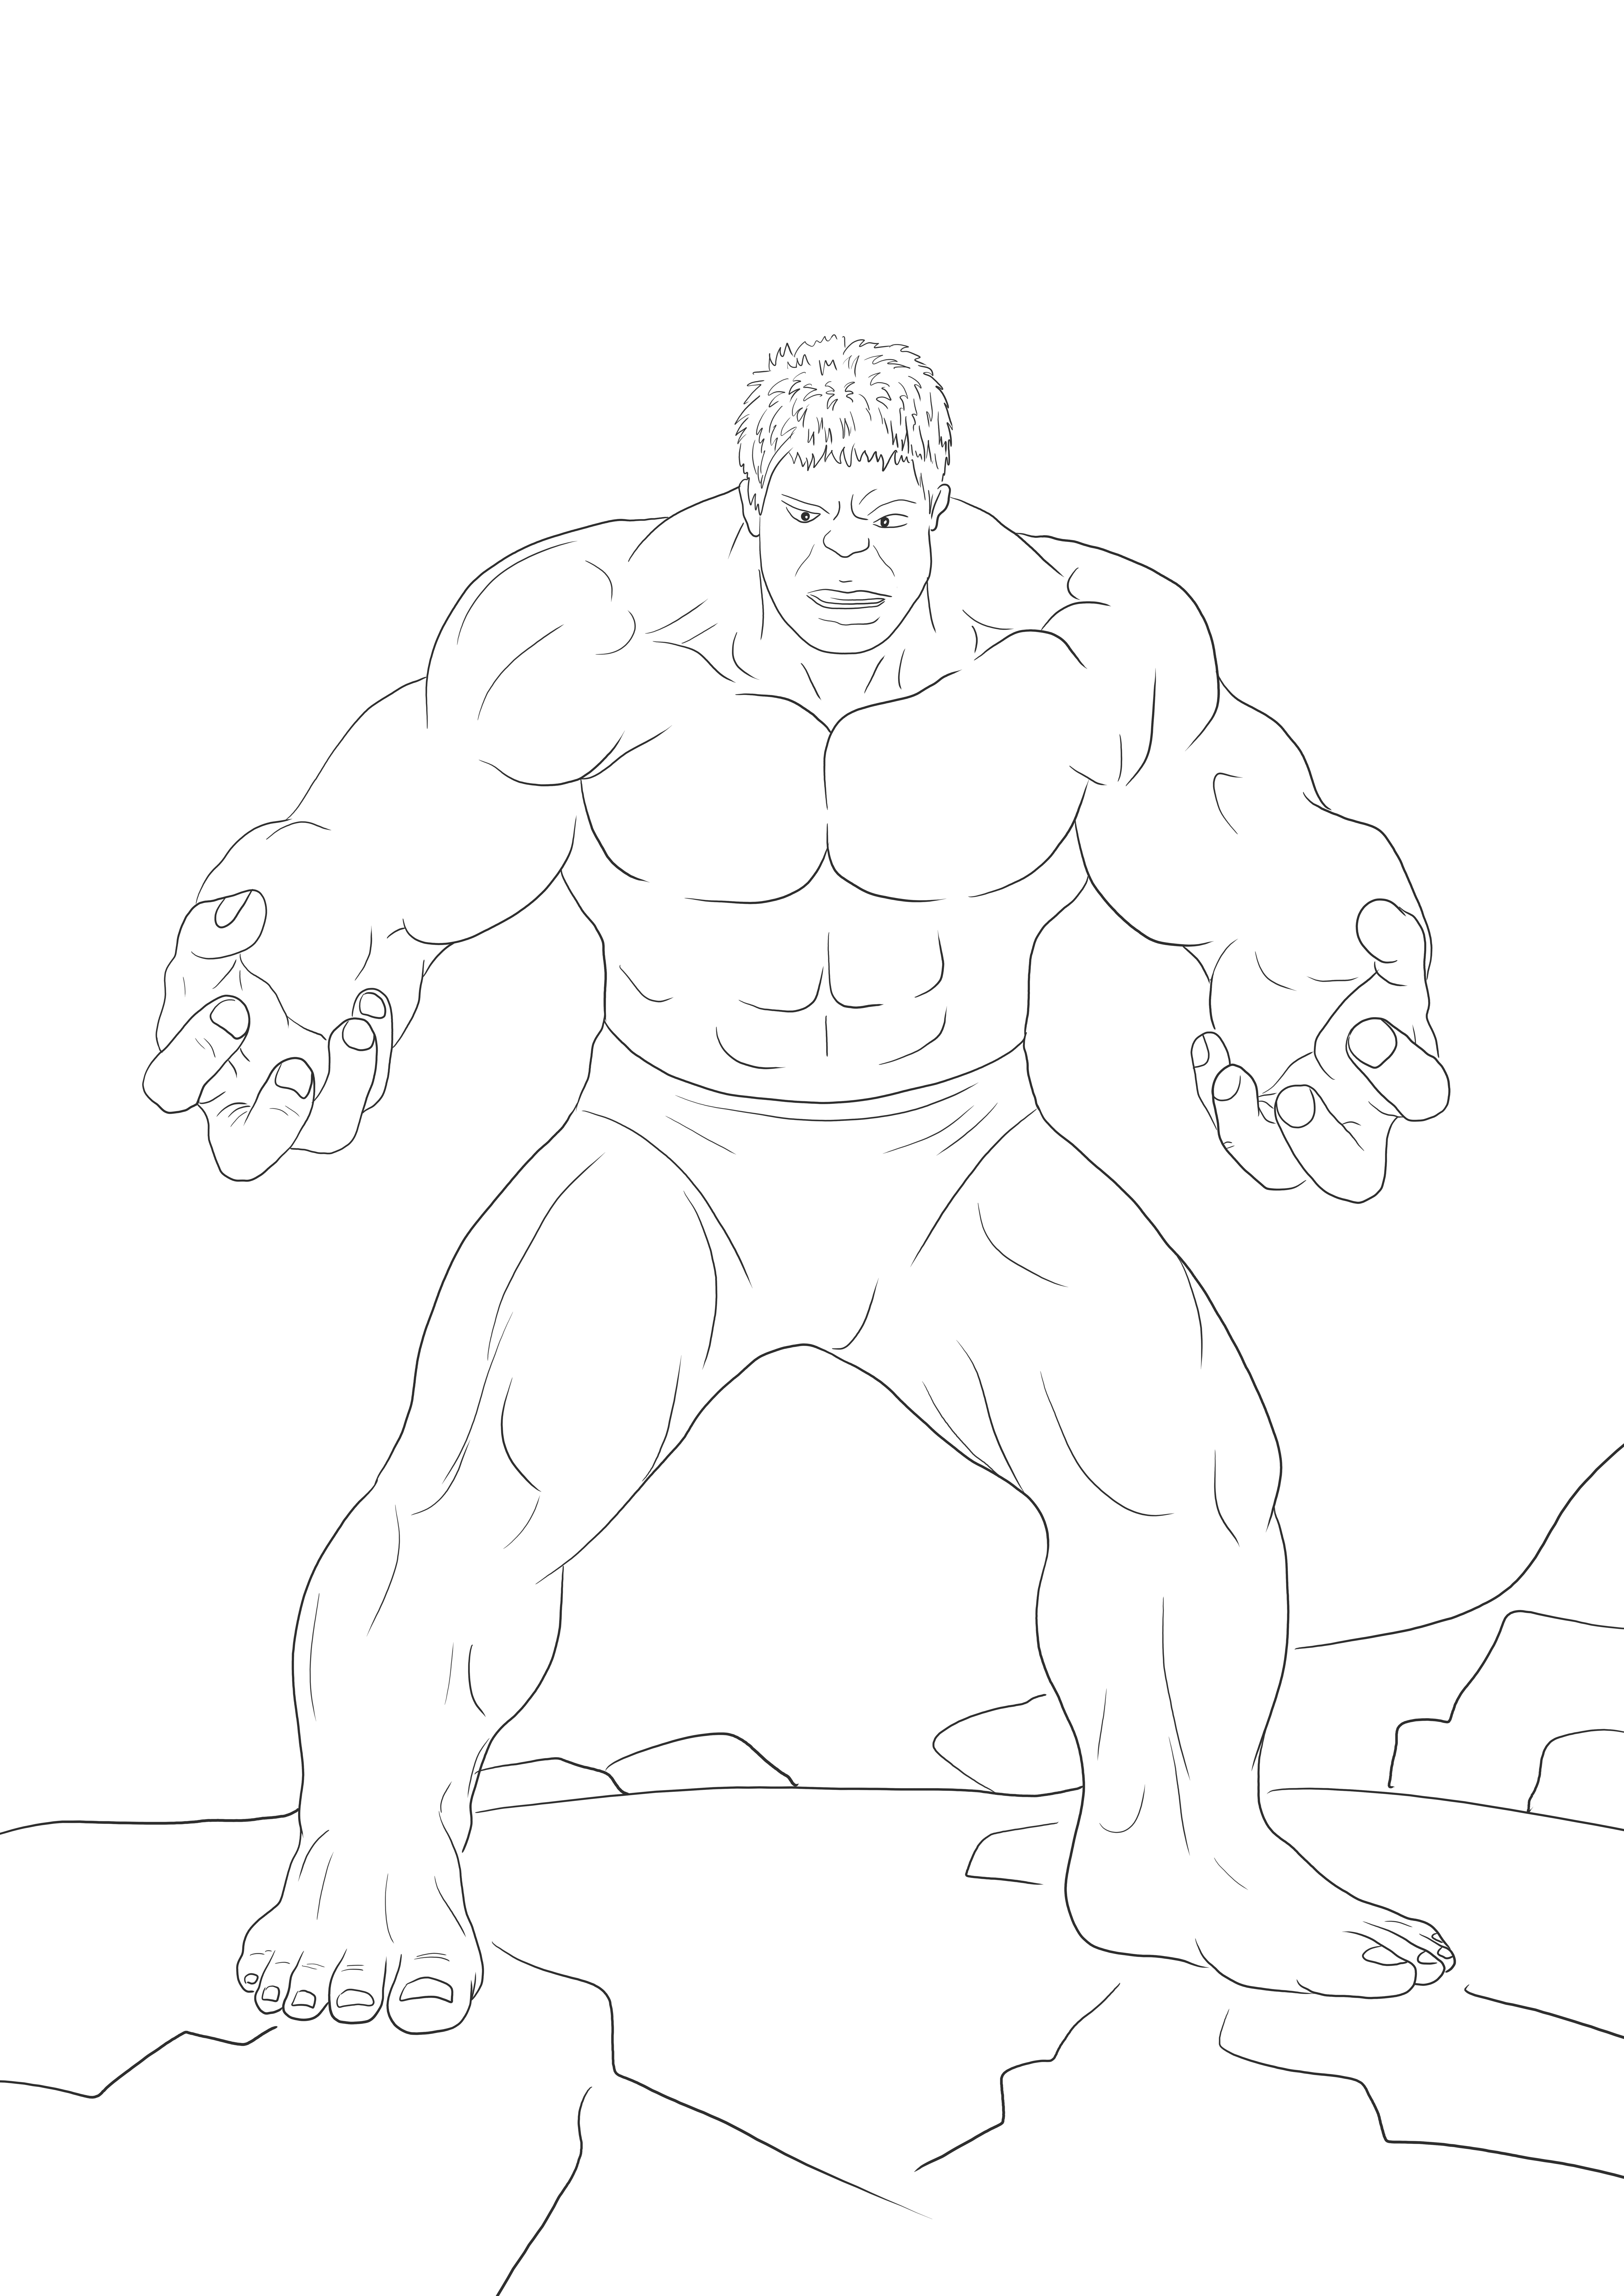 Free printable of angry Hulk to color to teach about Marvel heroes